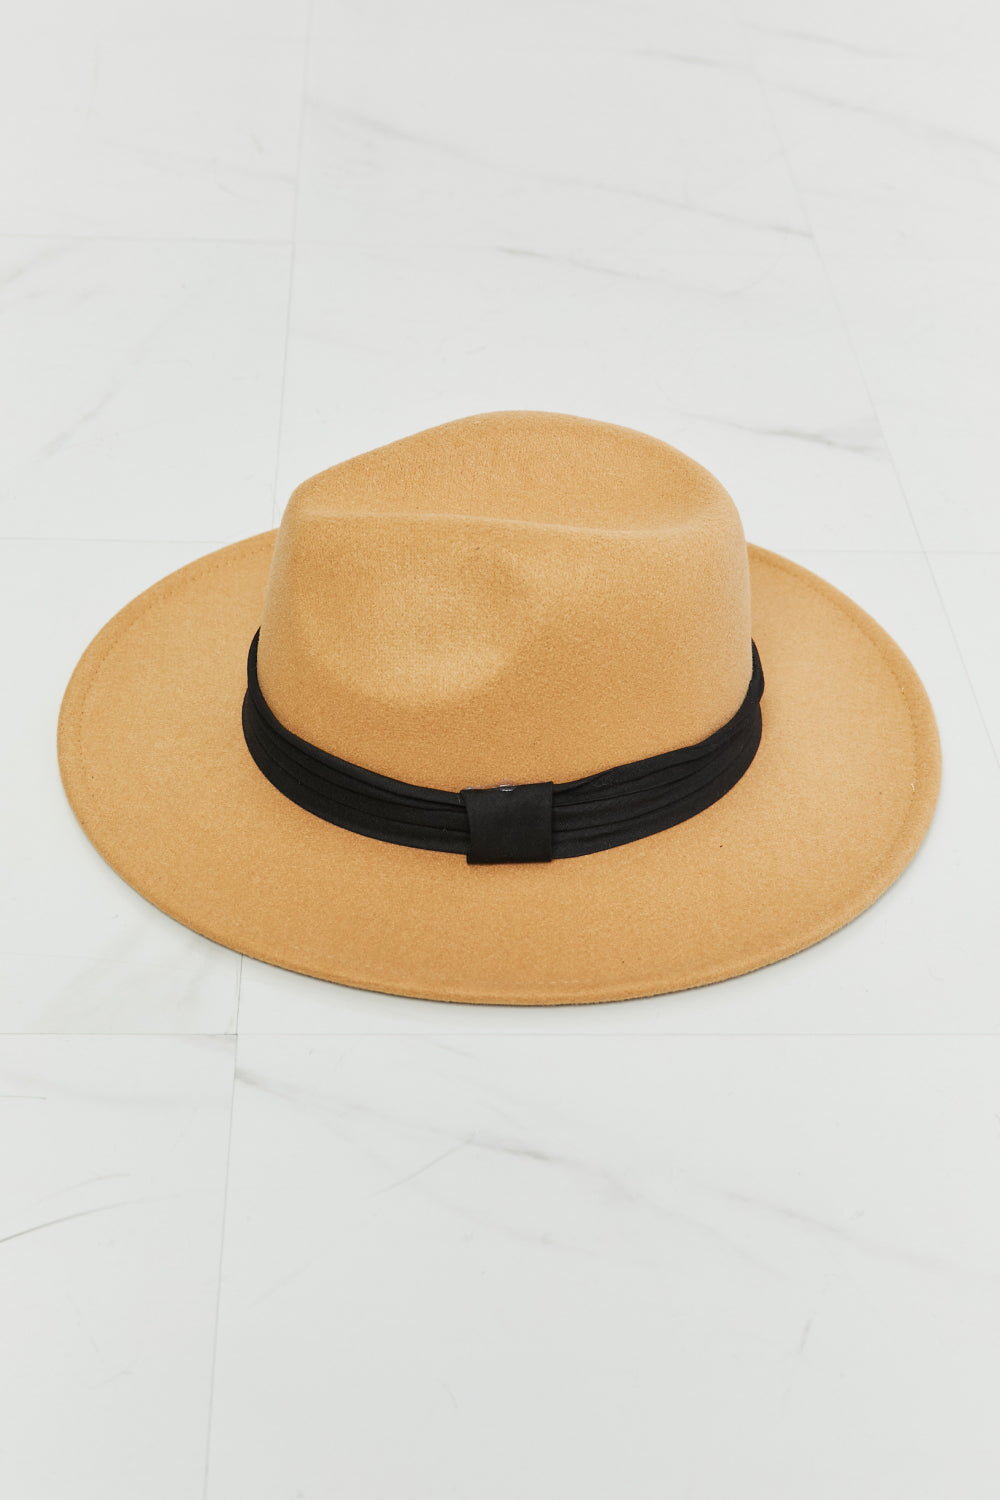 Fame You Got It Fedora Hat- ONLINE ONLY- 2-7 DAY SHIPPING